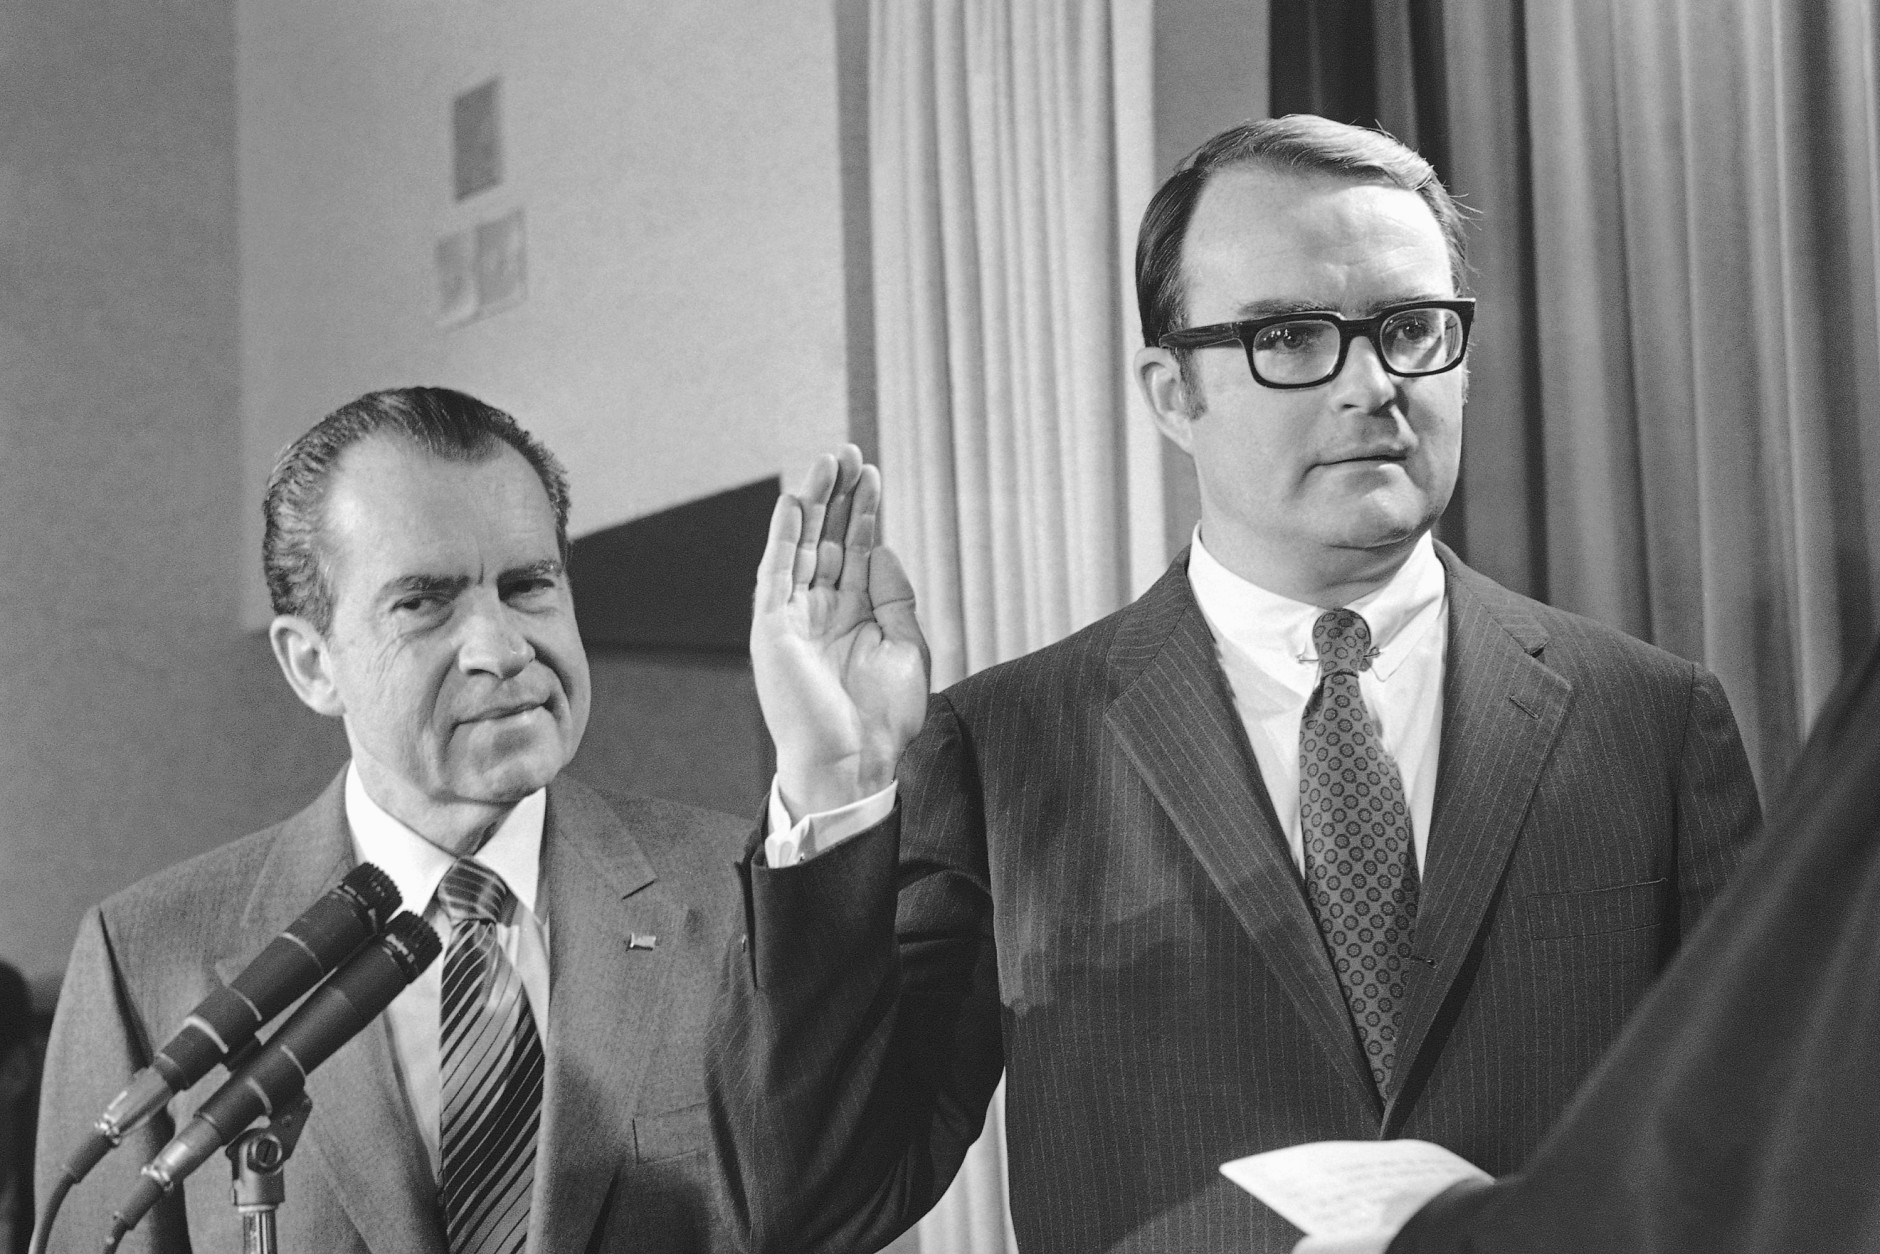 William D. Ruckelshaus is sworn in as administrator of the new Environmental Protection Agency with President Richard Nixon behind him in the White House ceremony in Washington on Dec. 4, 1970. (AP Photo/Charles Tasnadi)